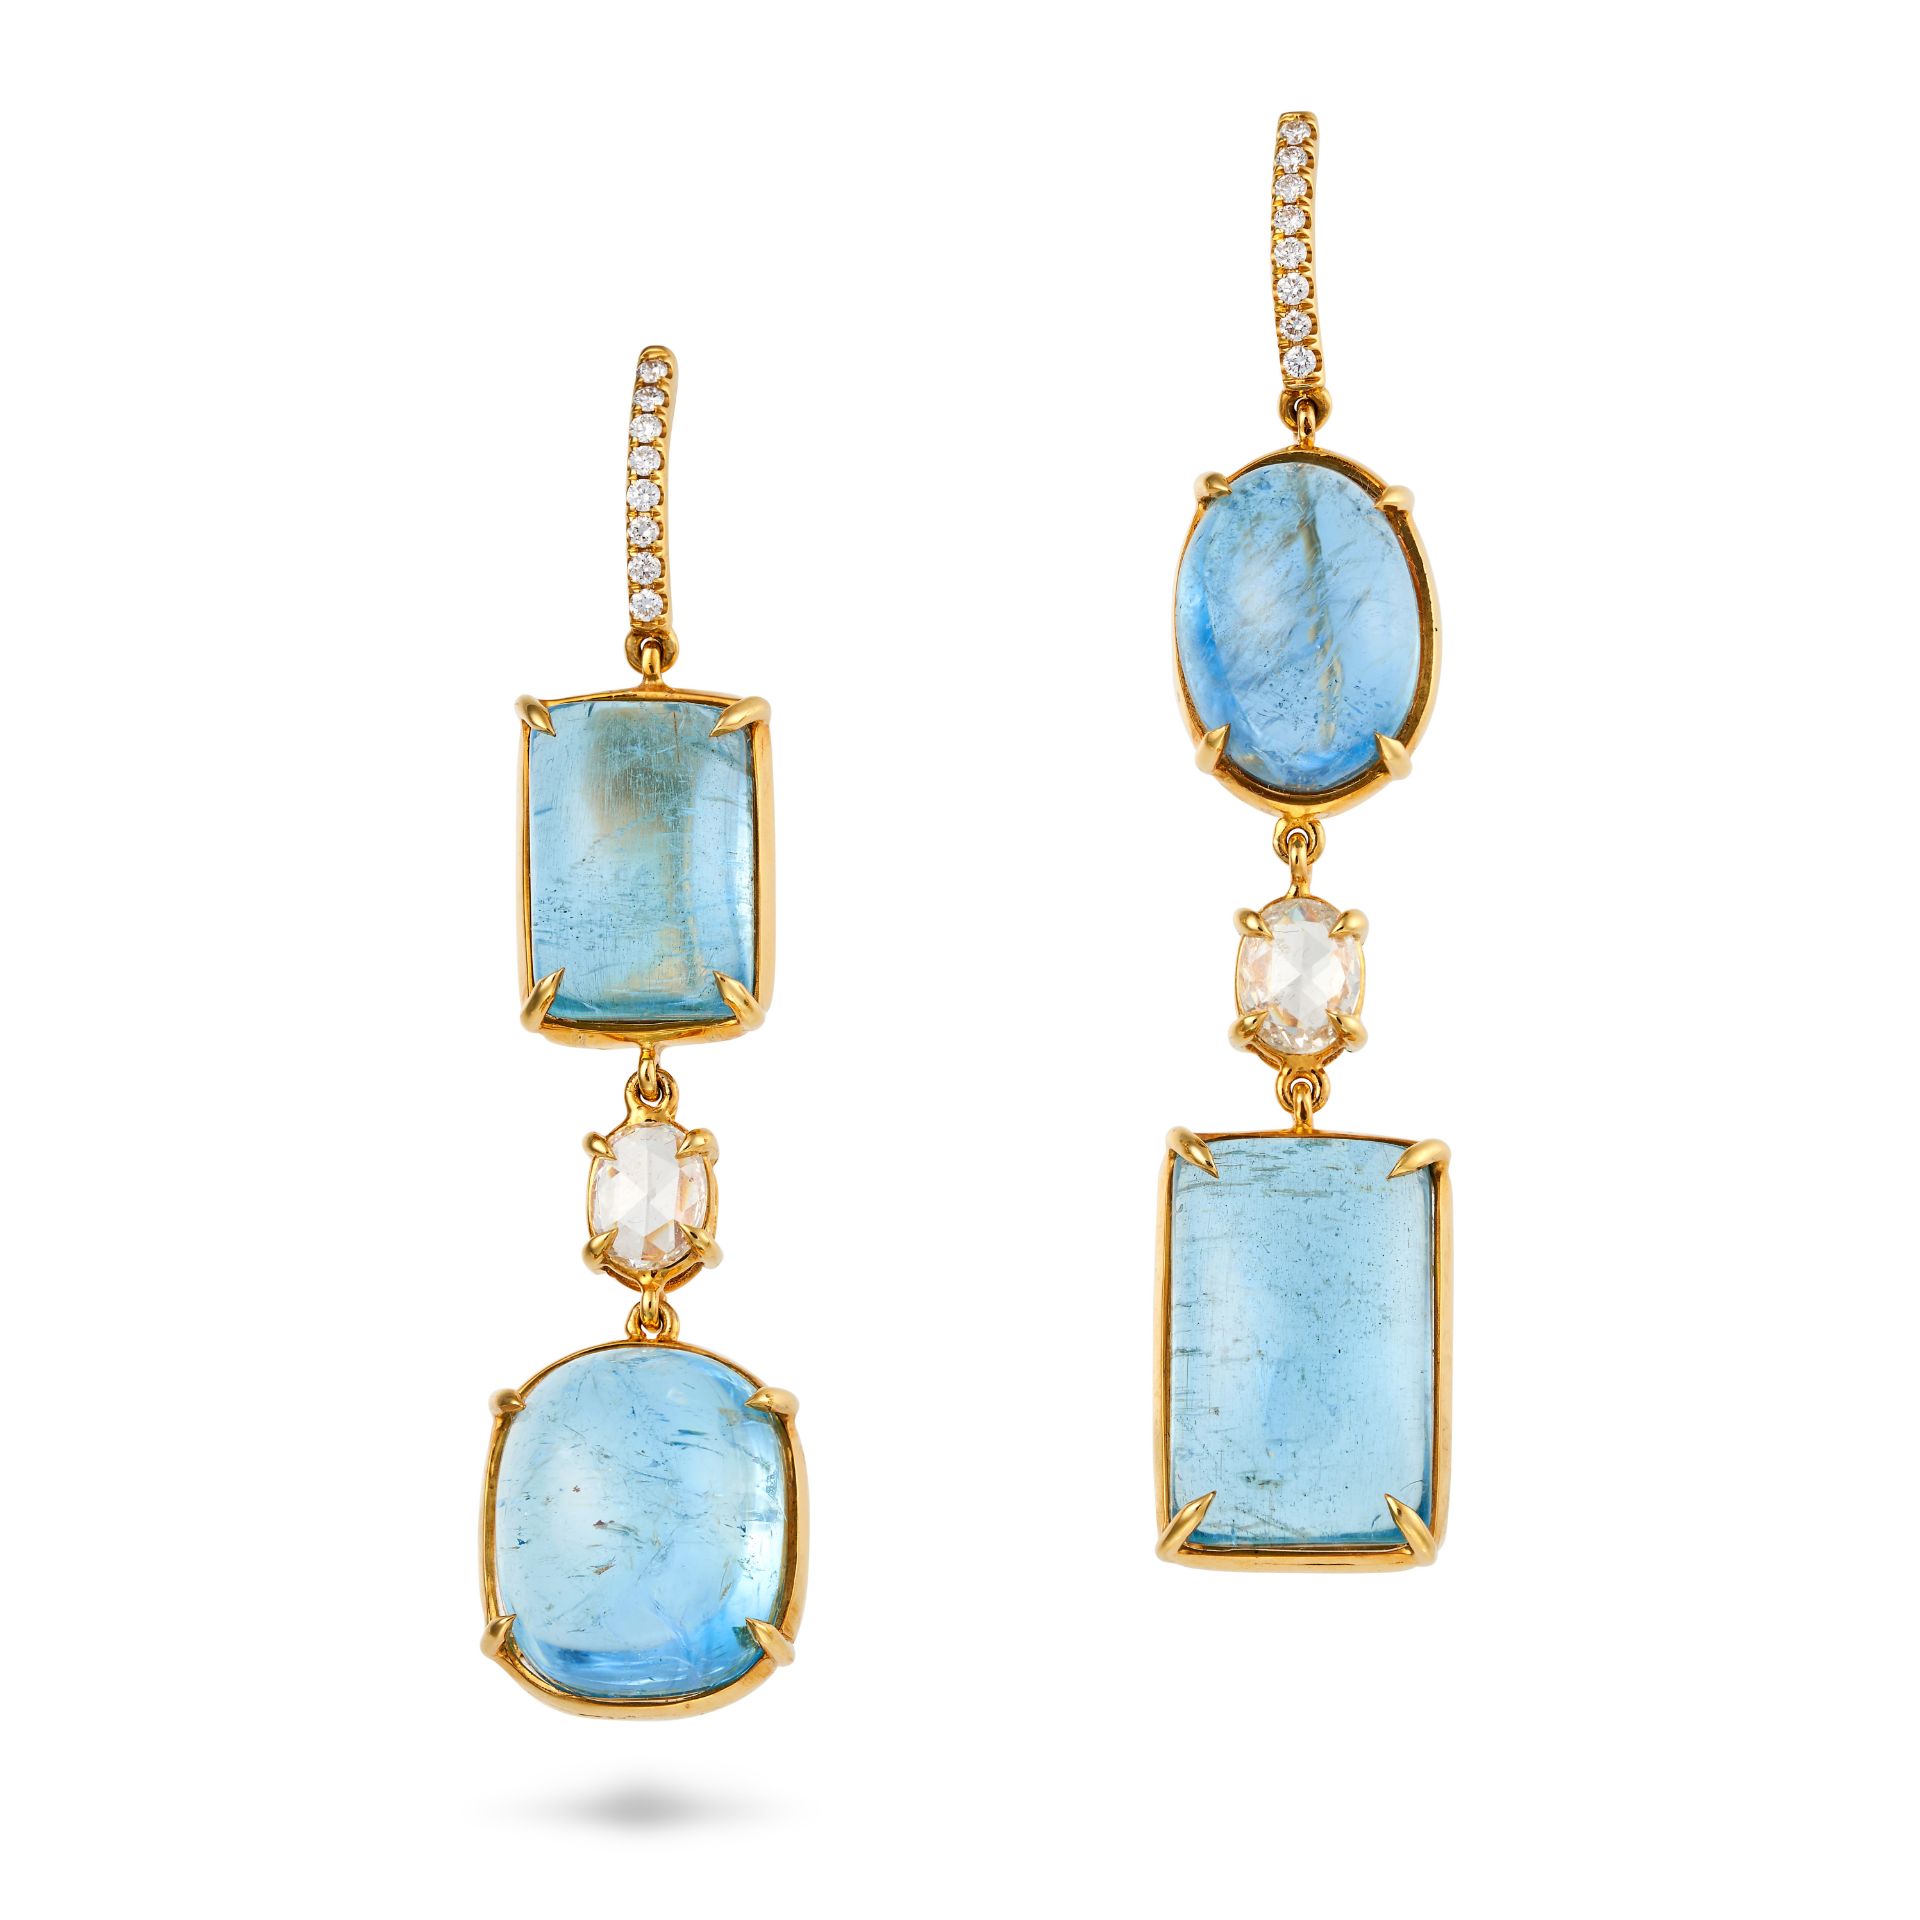 A PAIR OF AQUAMARINE AND DIAMOND DROP EARRINGS each comprising a hook fitting set with a row of r...